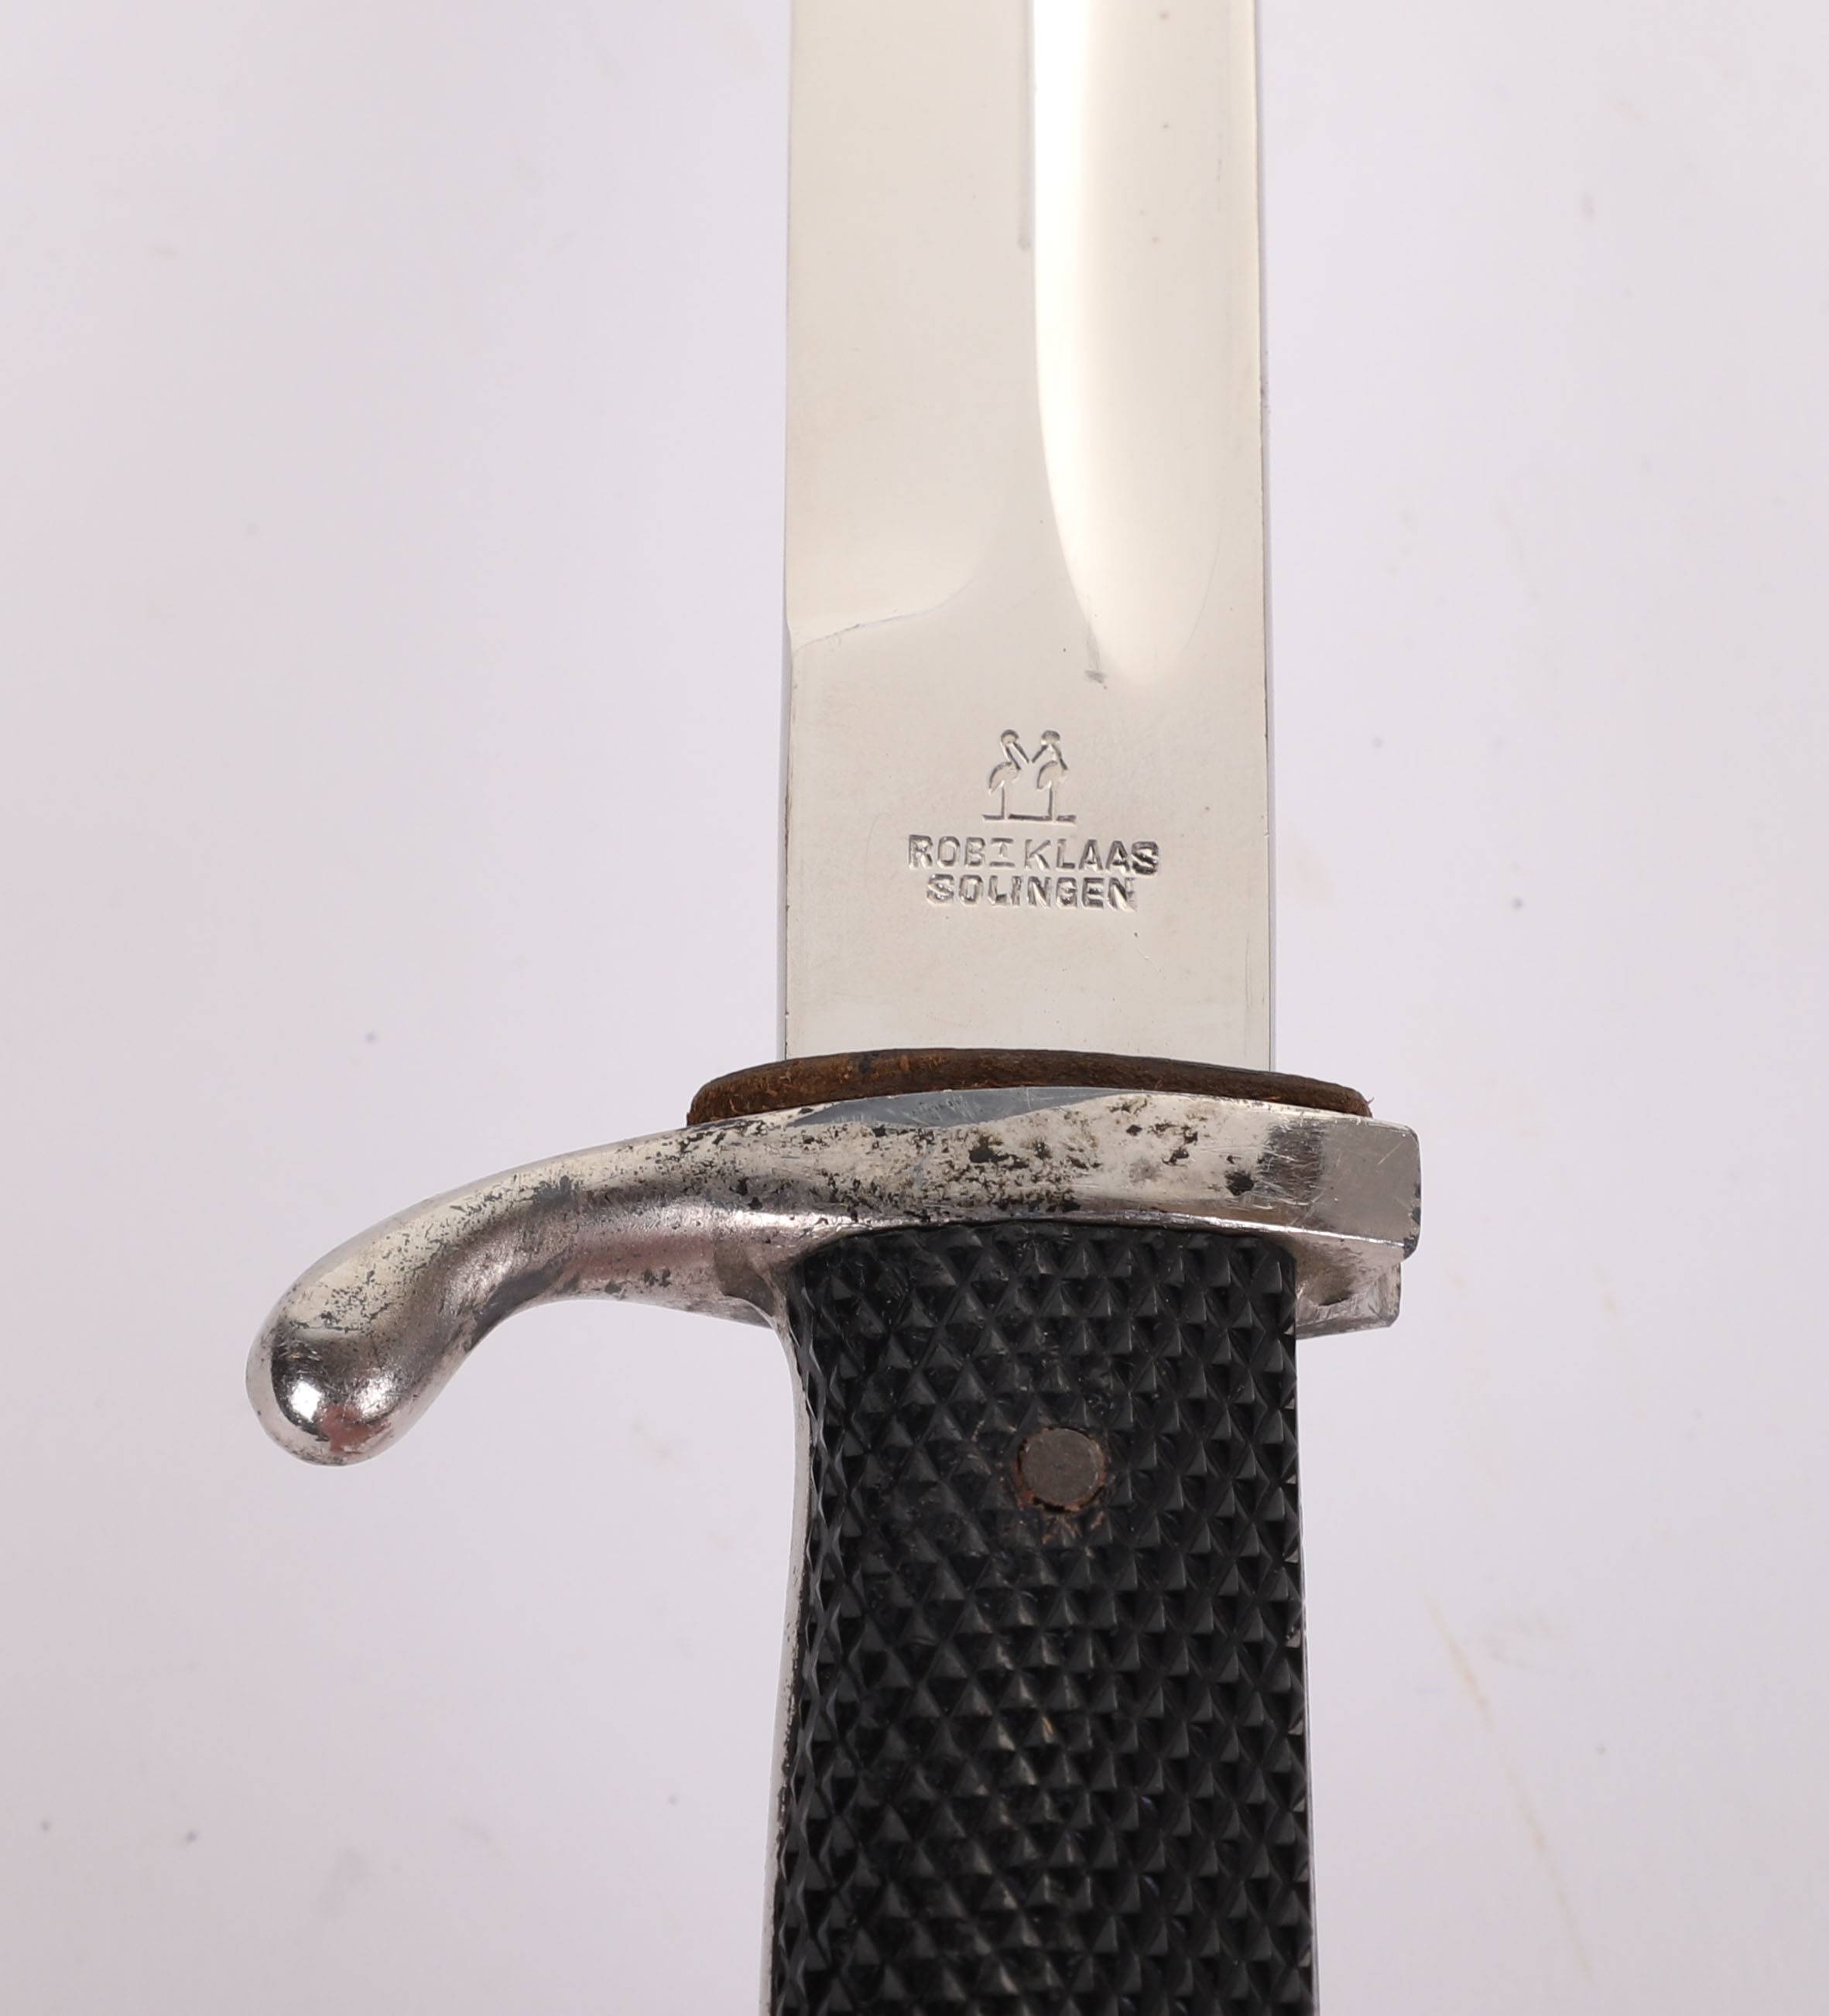 THIRD REICH DRESS K98 BAYONET WITH ENGRAVED BLADE BY ROBERT KLASS - Image 8 of 10